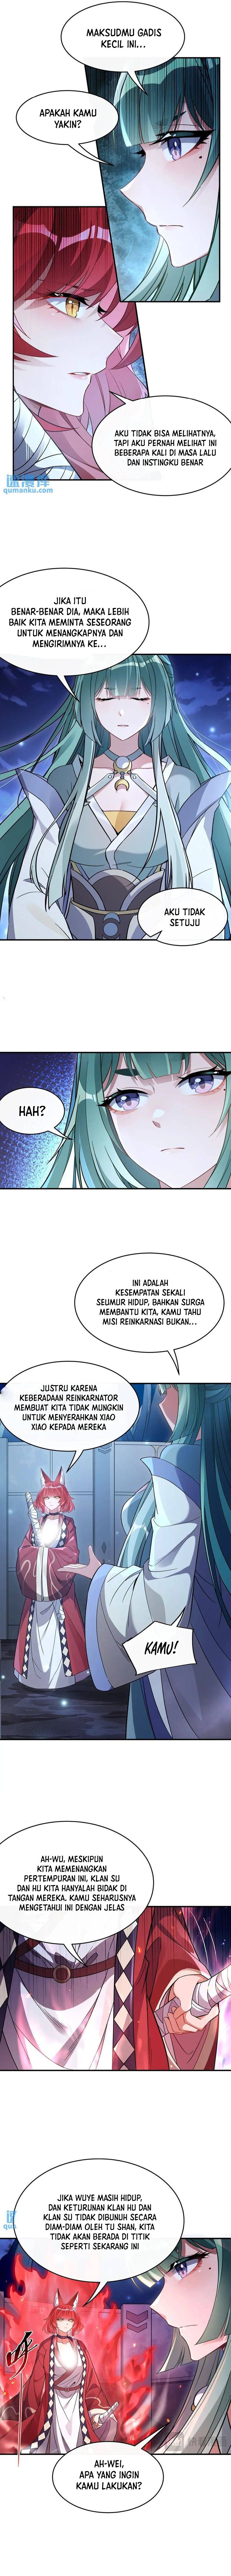 Dilarang COPAS - situs resmi www.mangacanblog.com - Komik my female apprentices are all big shots from the future 210 - chapter 210 211 Indonesia my female apprentices are all big shots from the future 210 - chapter 210 Terbaru 6|Baca Manga Komik Indonesia|Mangacan